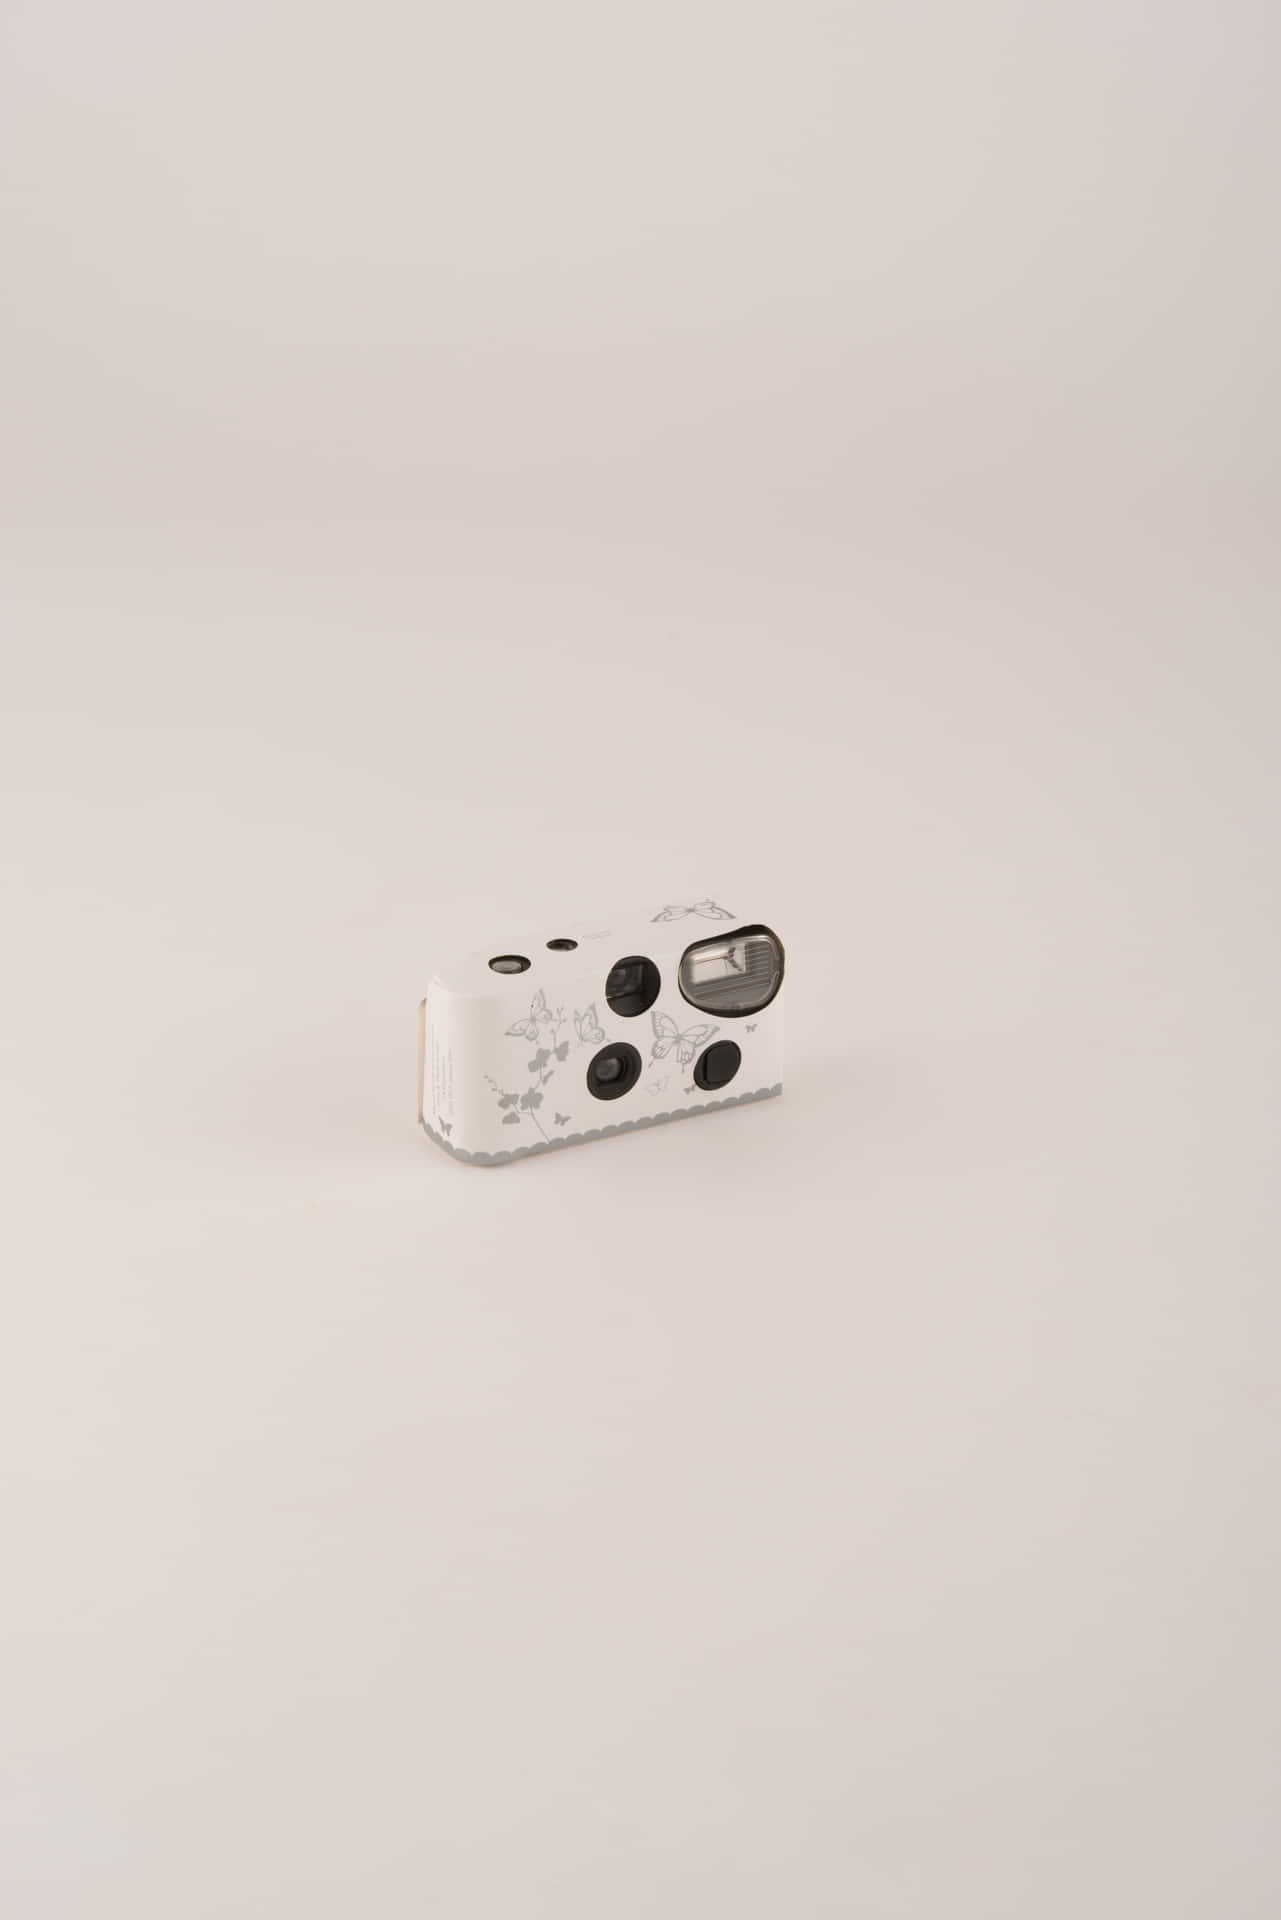 A White And Black Camera With Dots On It